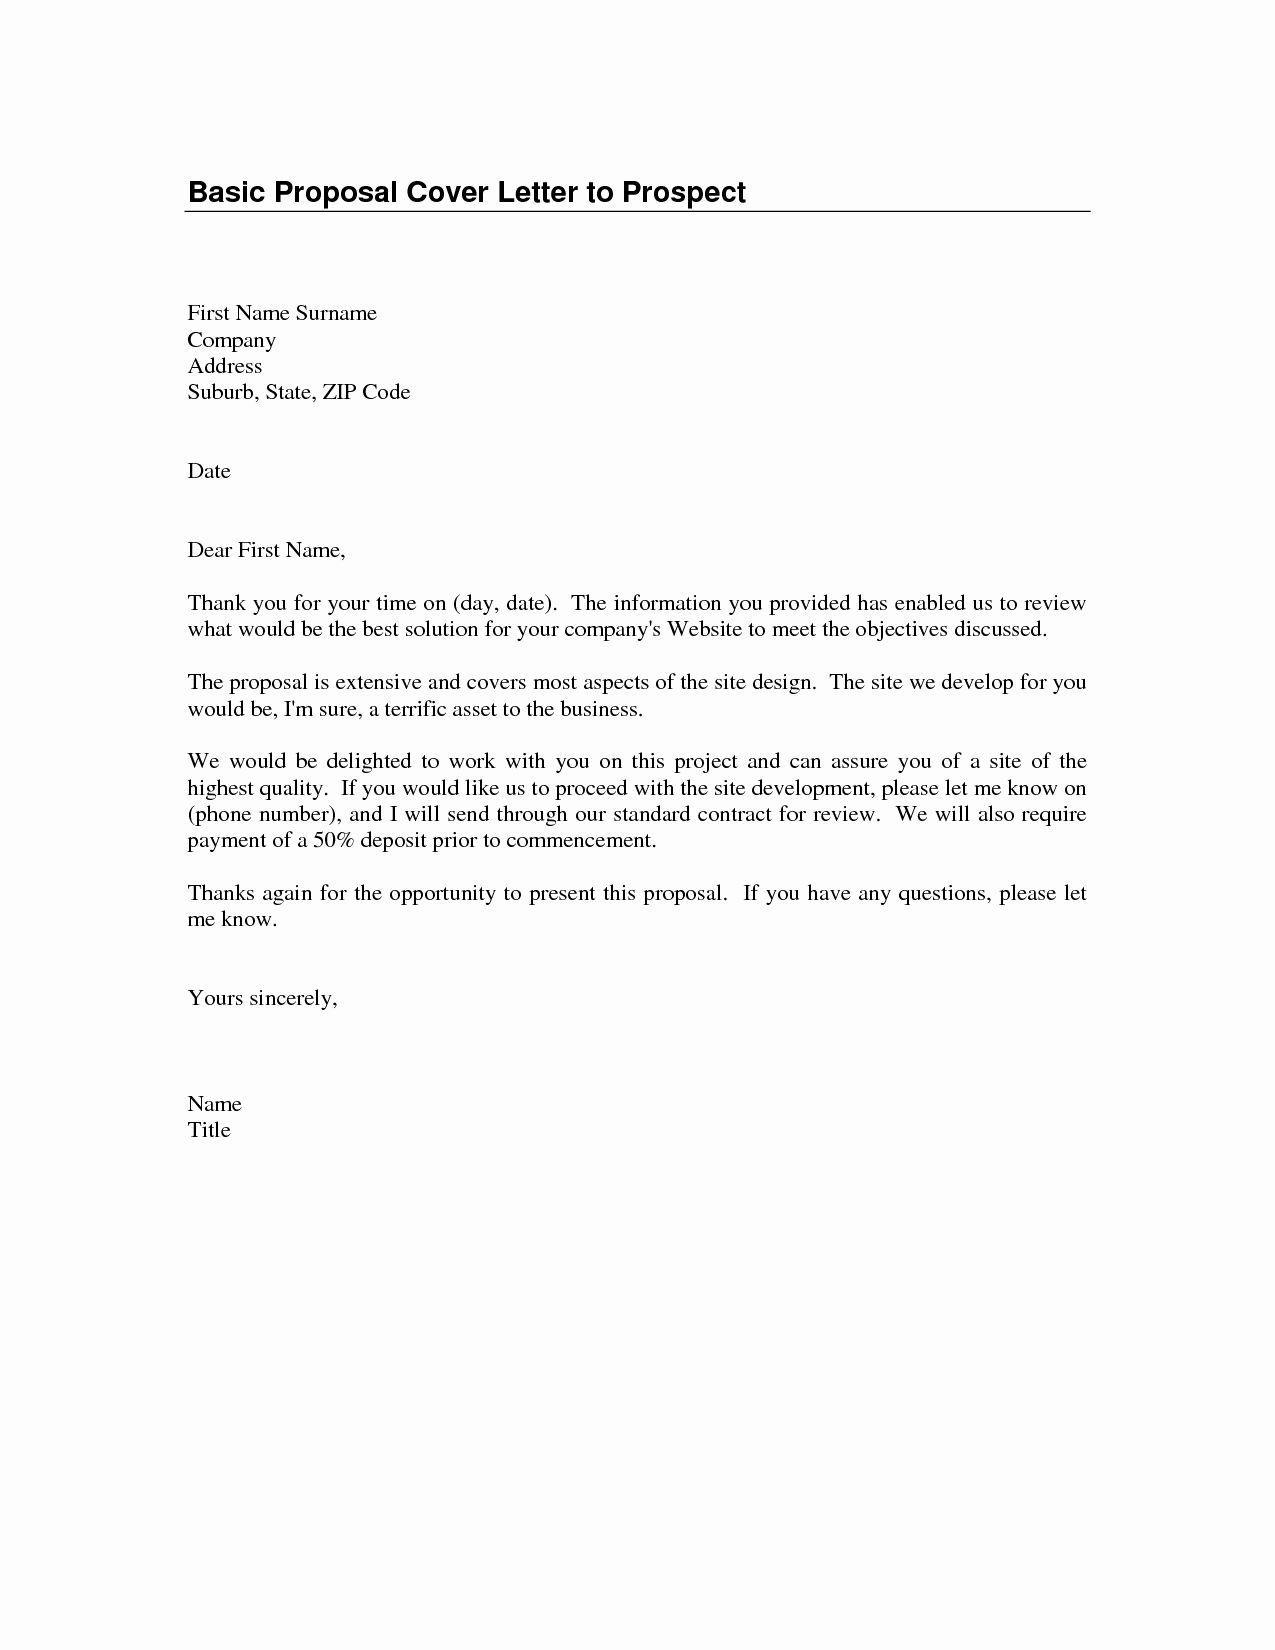 Serving Cover Letter Example New Basic Cover Letter Sample Basic Cover Letters Free